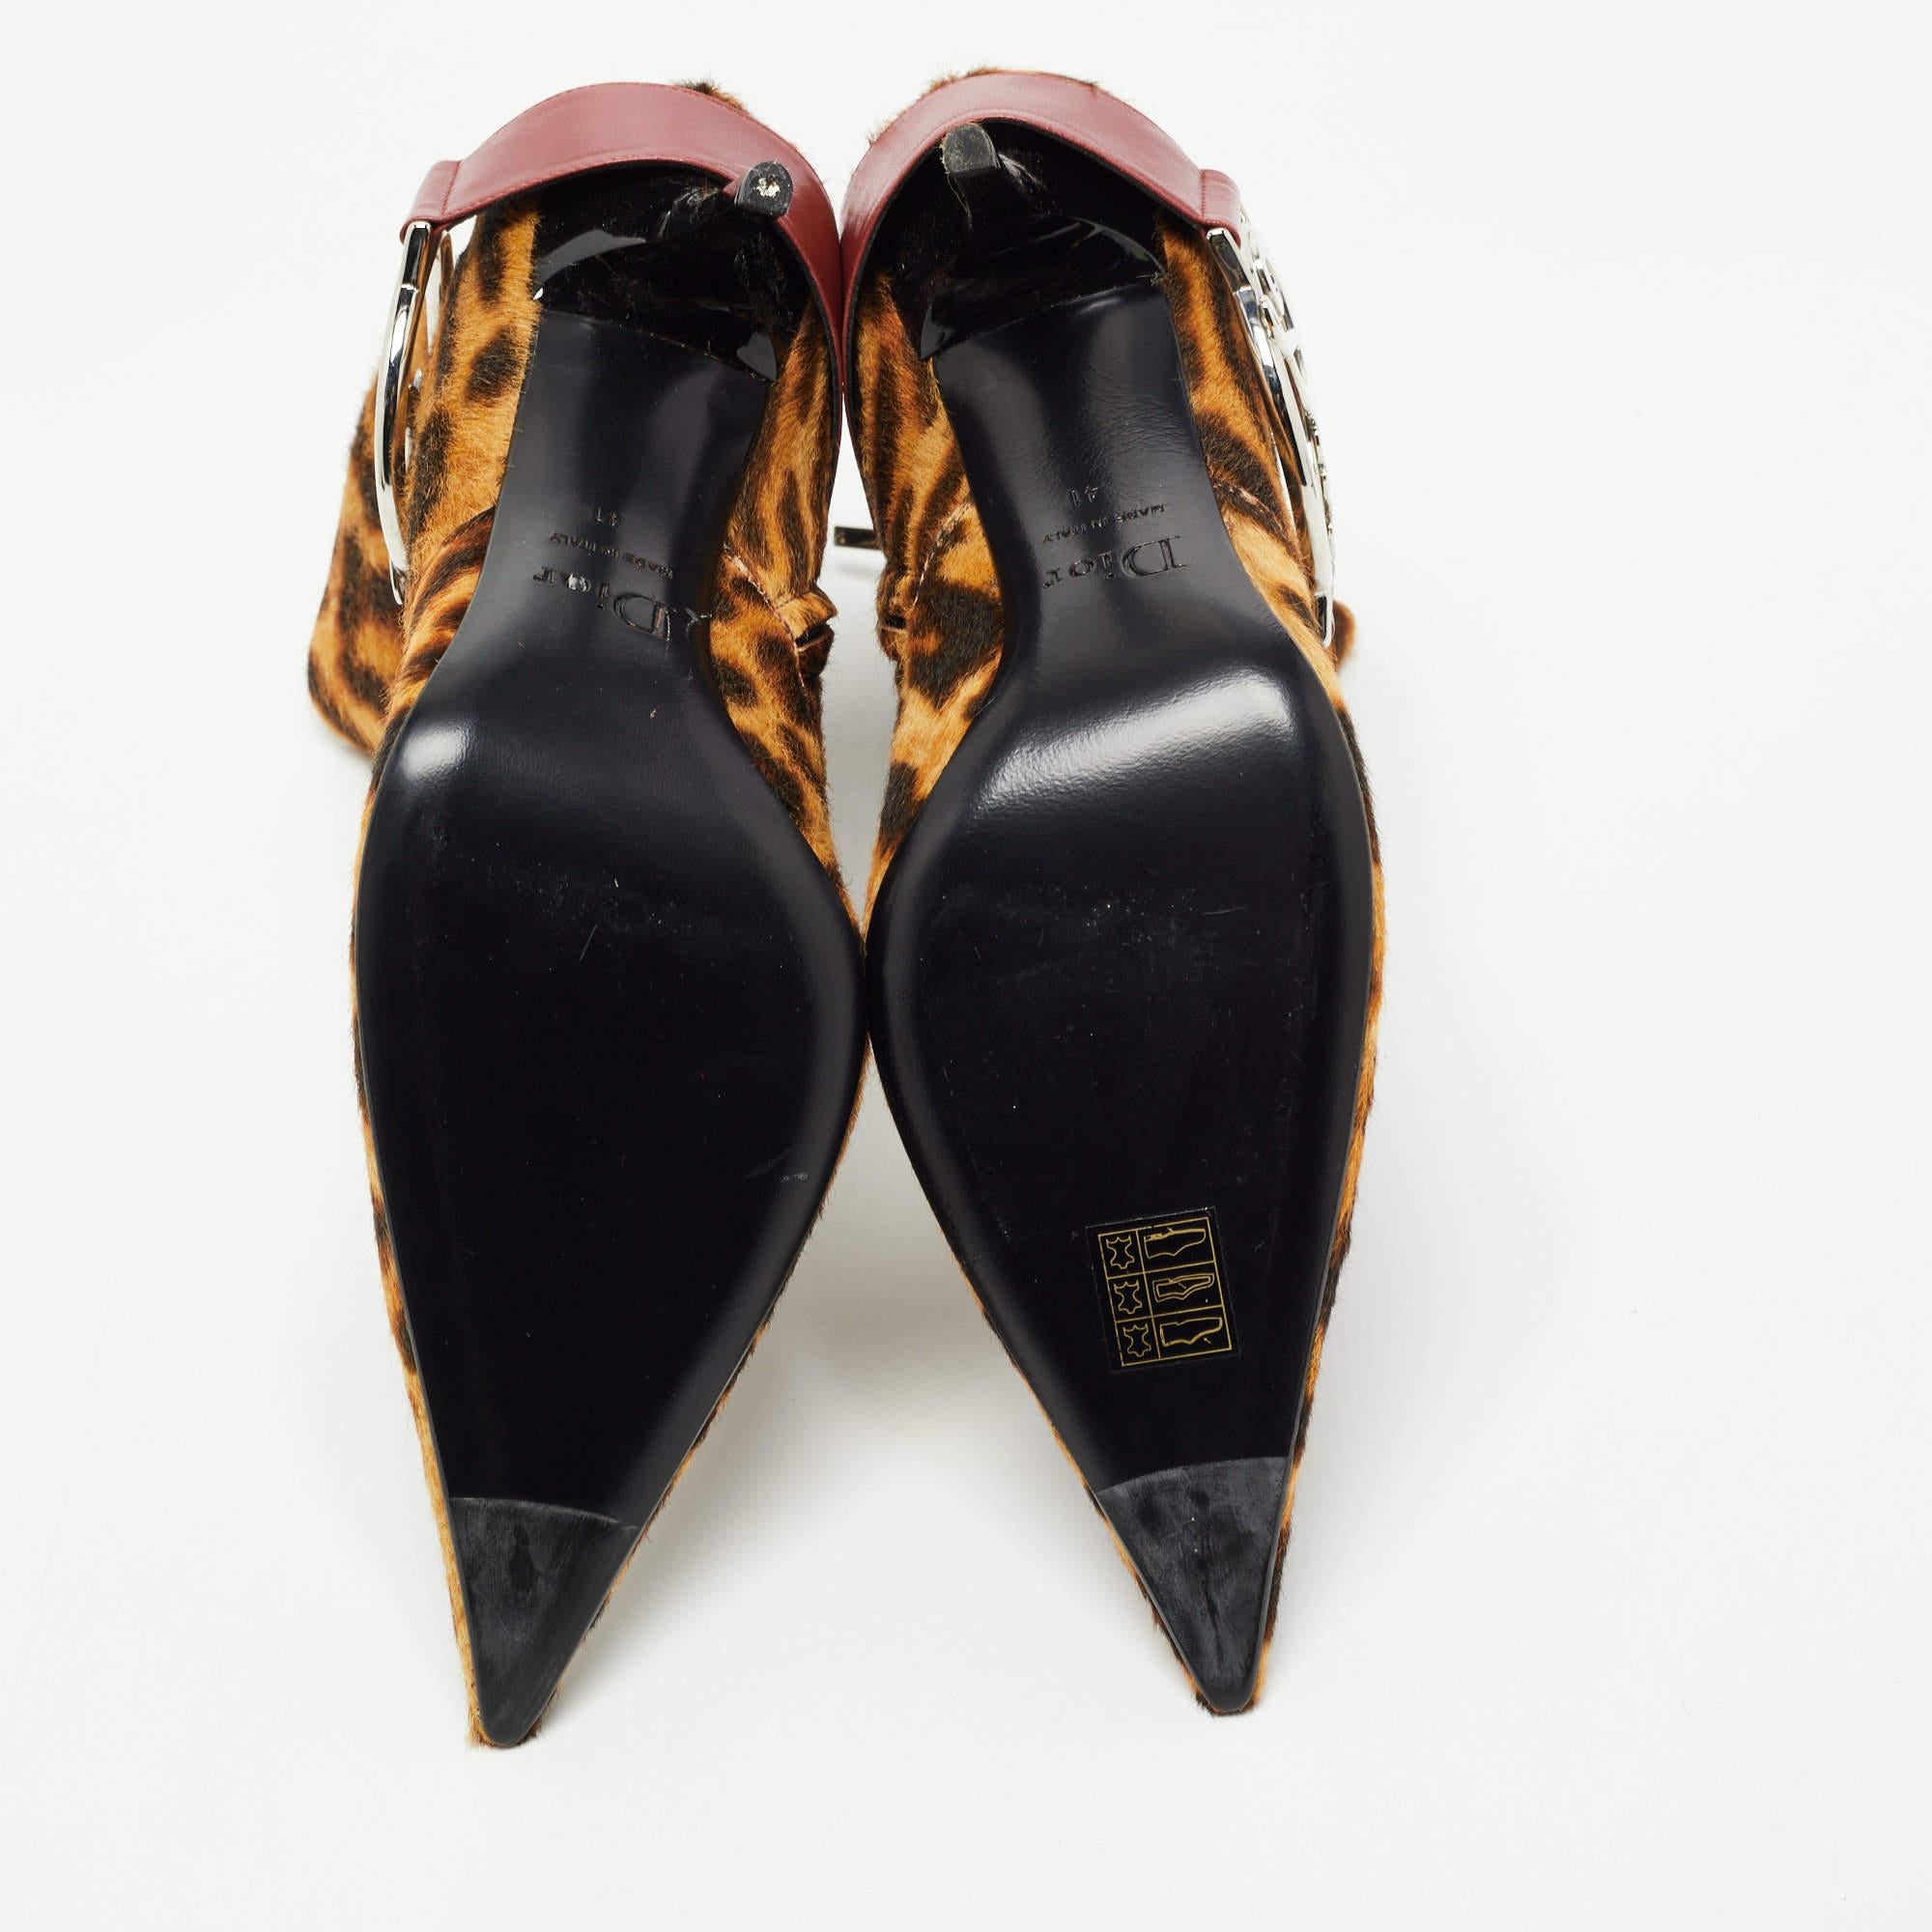 Dior Tricolor Leopard Print Calf Hair and Leather Ankle Booties Size 41 4